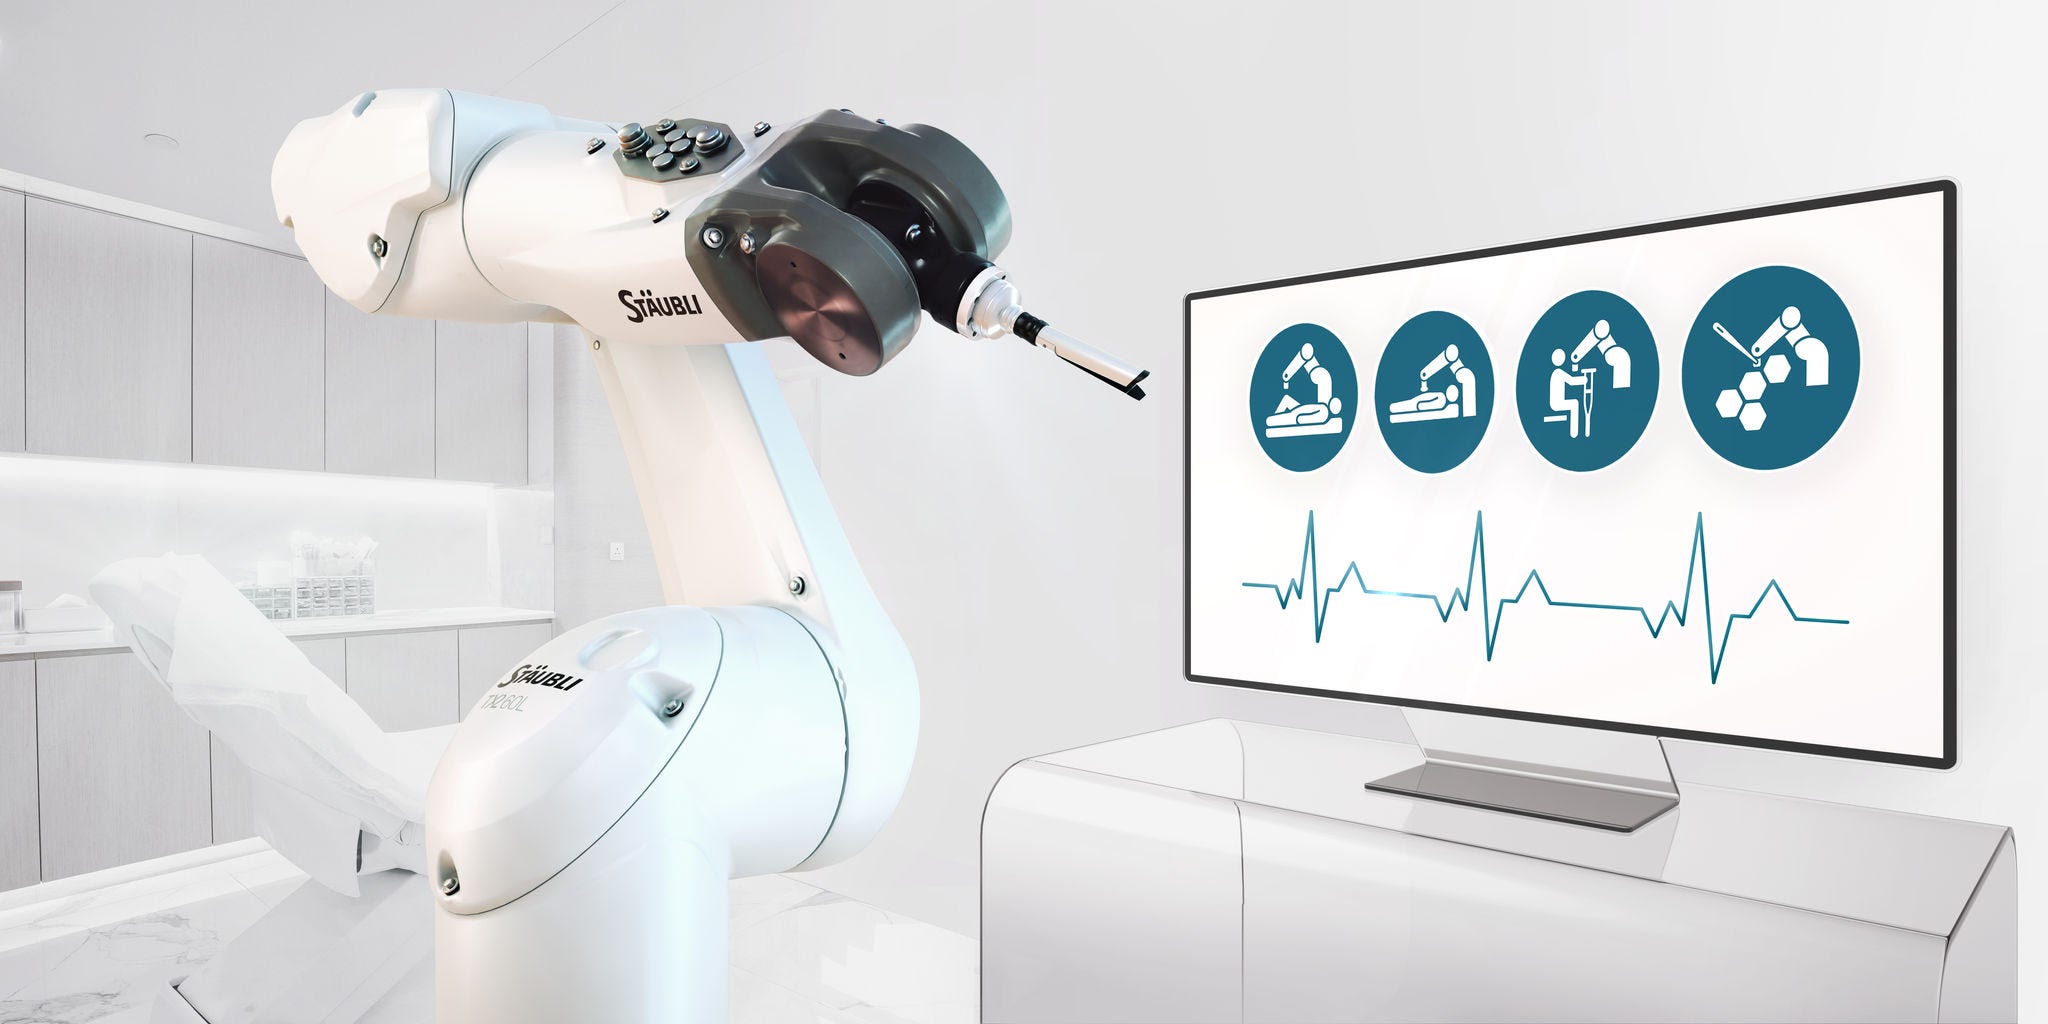 High-precision robots as medical and surgical assistants.